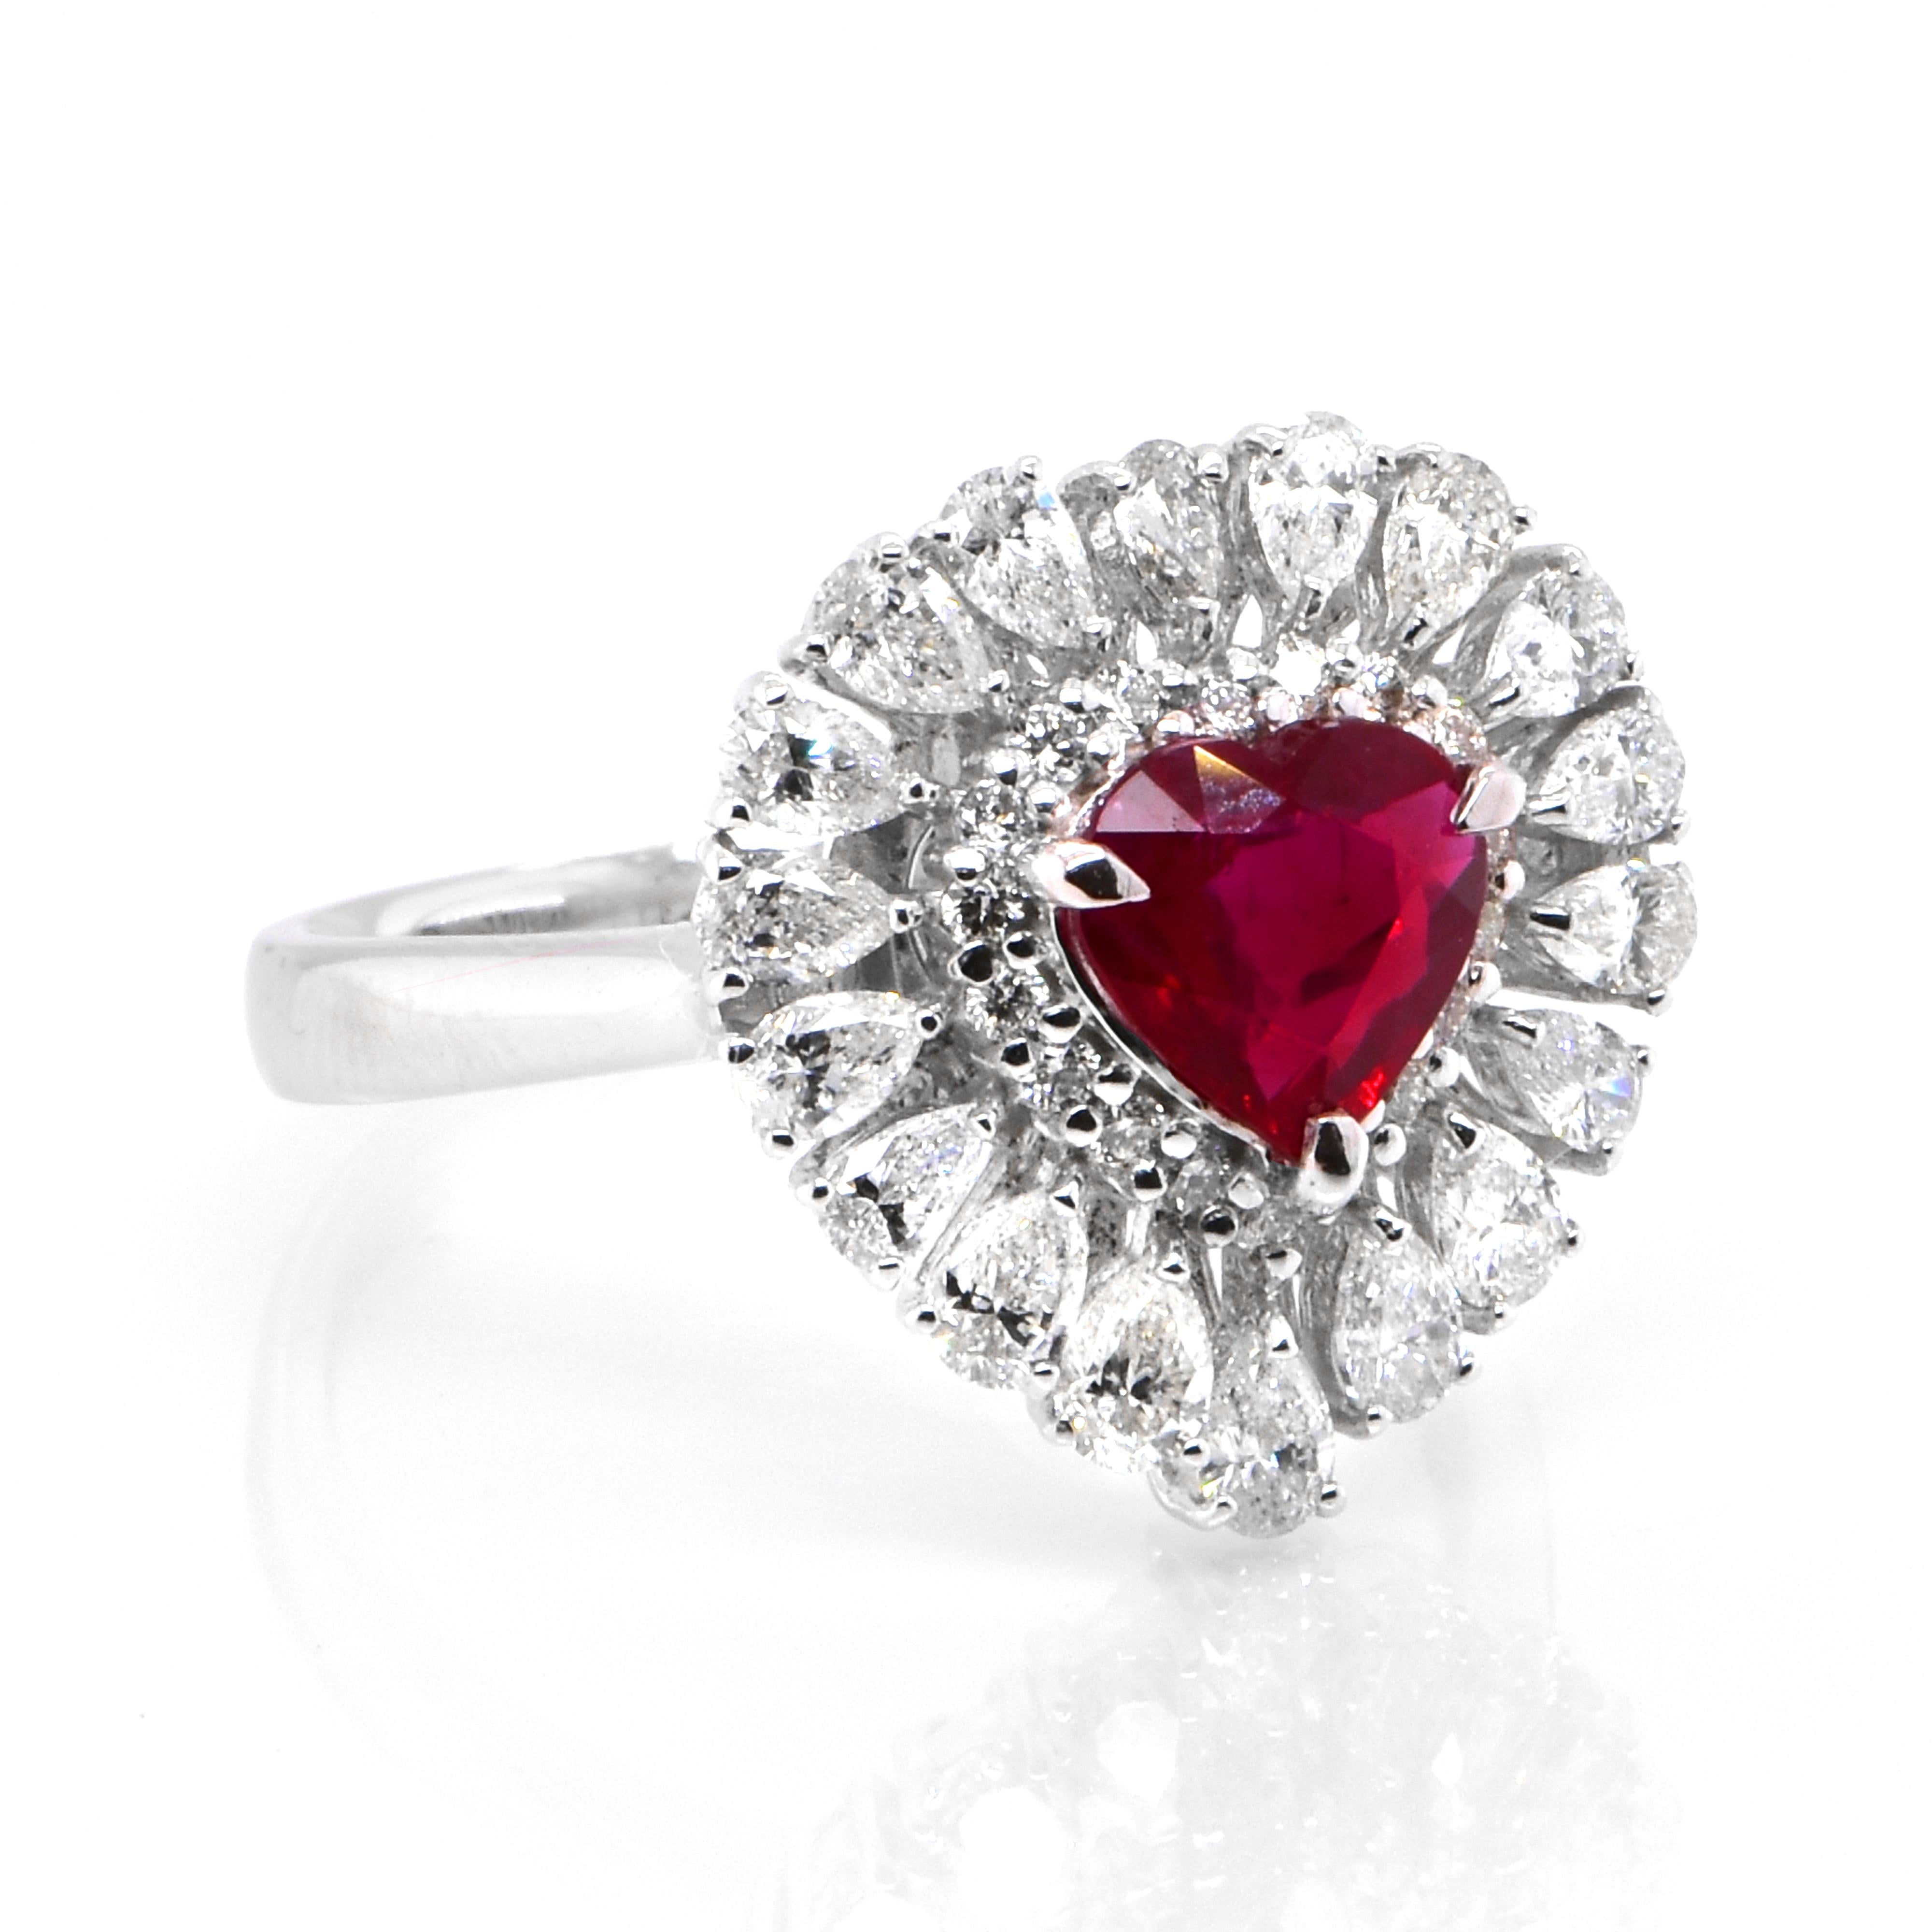 Modern GIA Certified 1.01 Carat, Pigeon Blood Red, Burmese Ruby Ring Made in Platinum For Sale